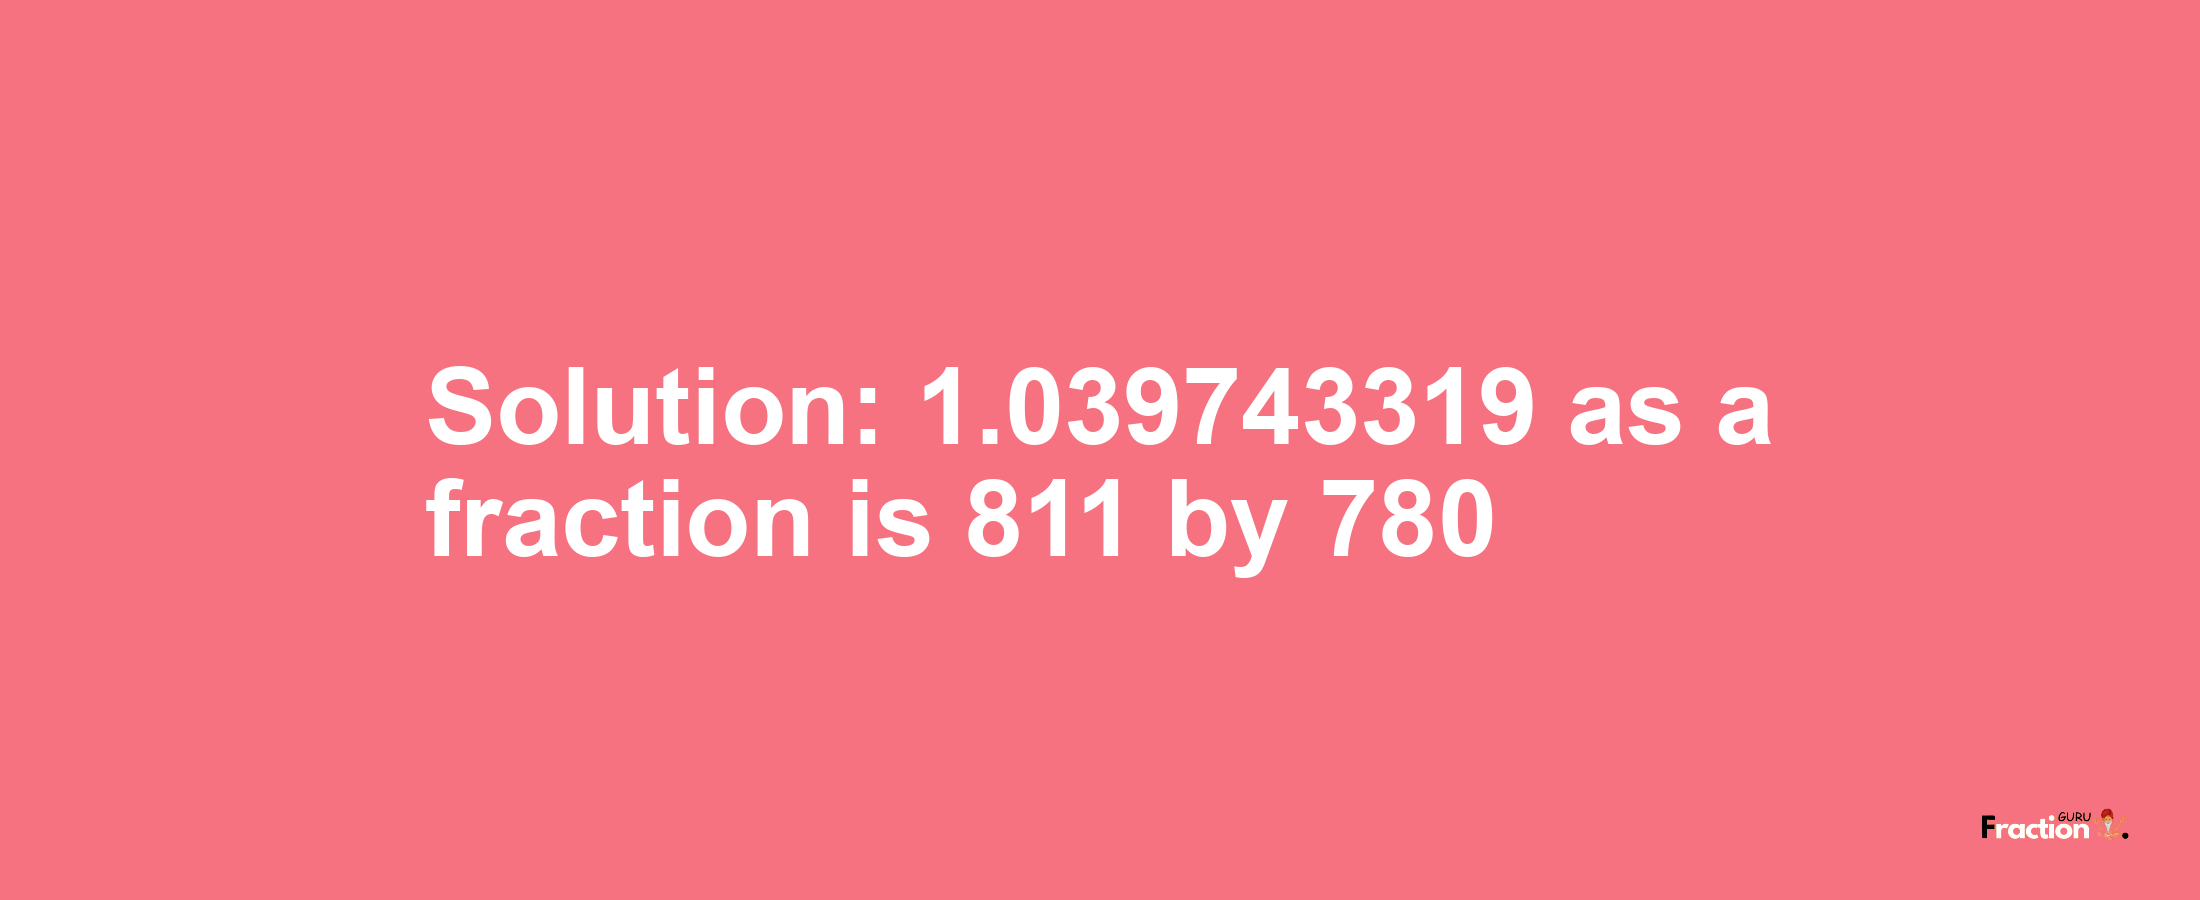 Solution:1.039743319 as a fraction is 811/780